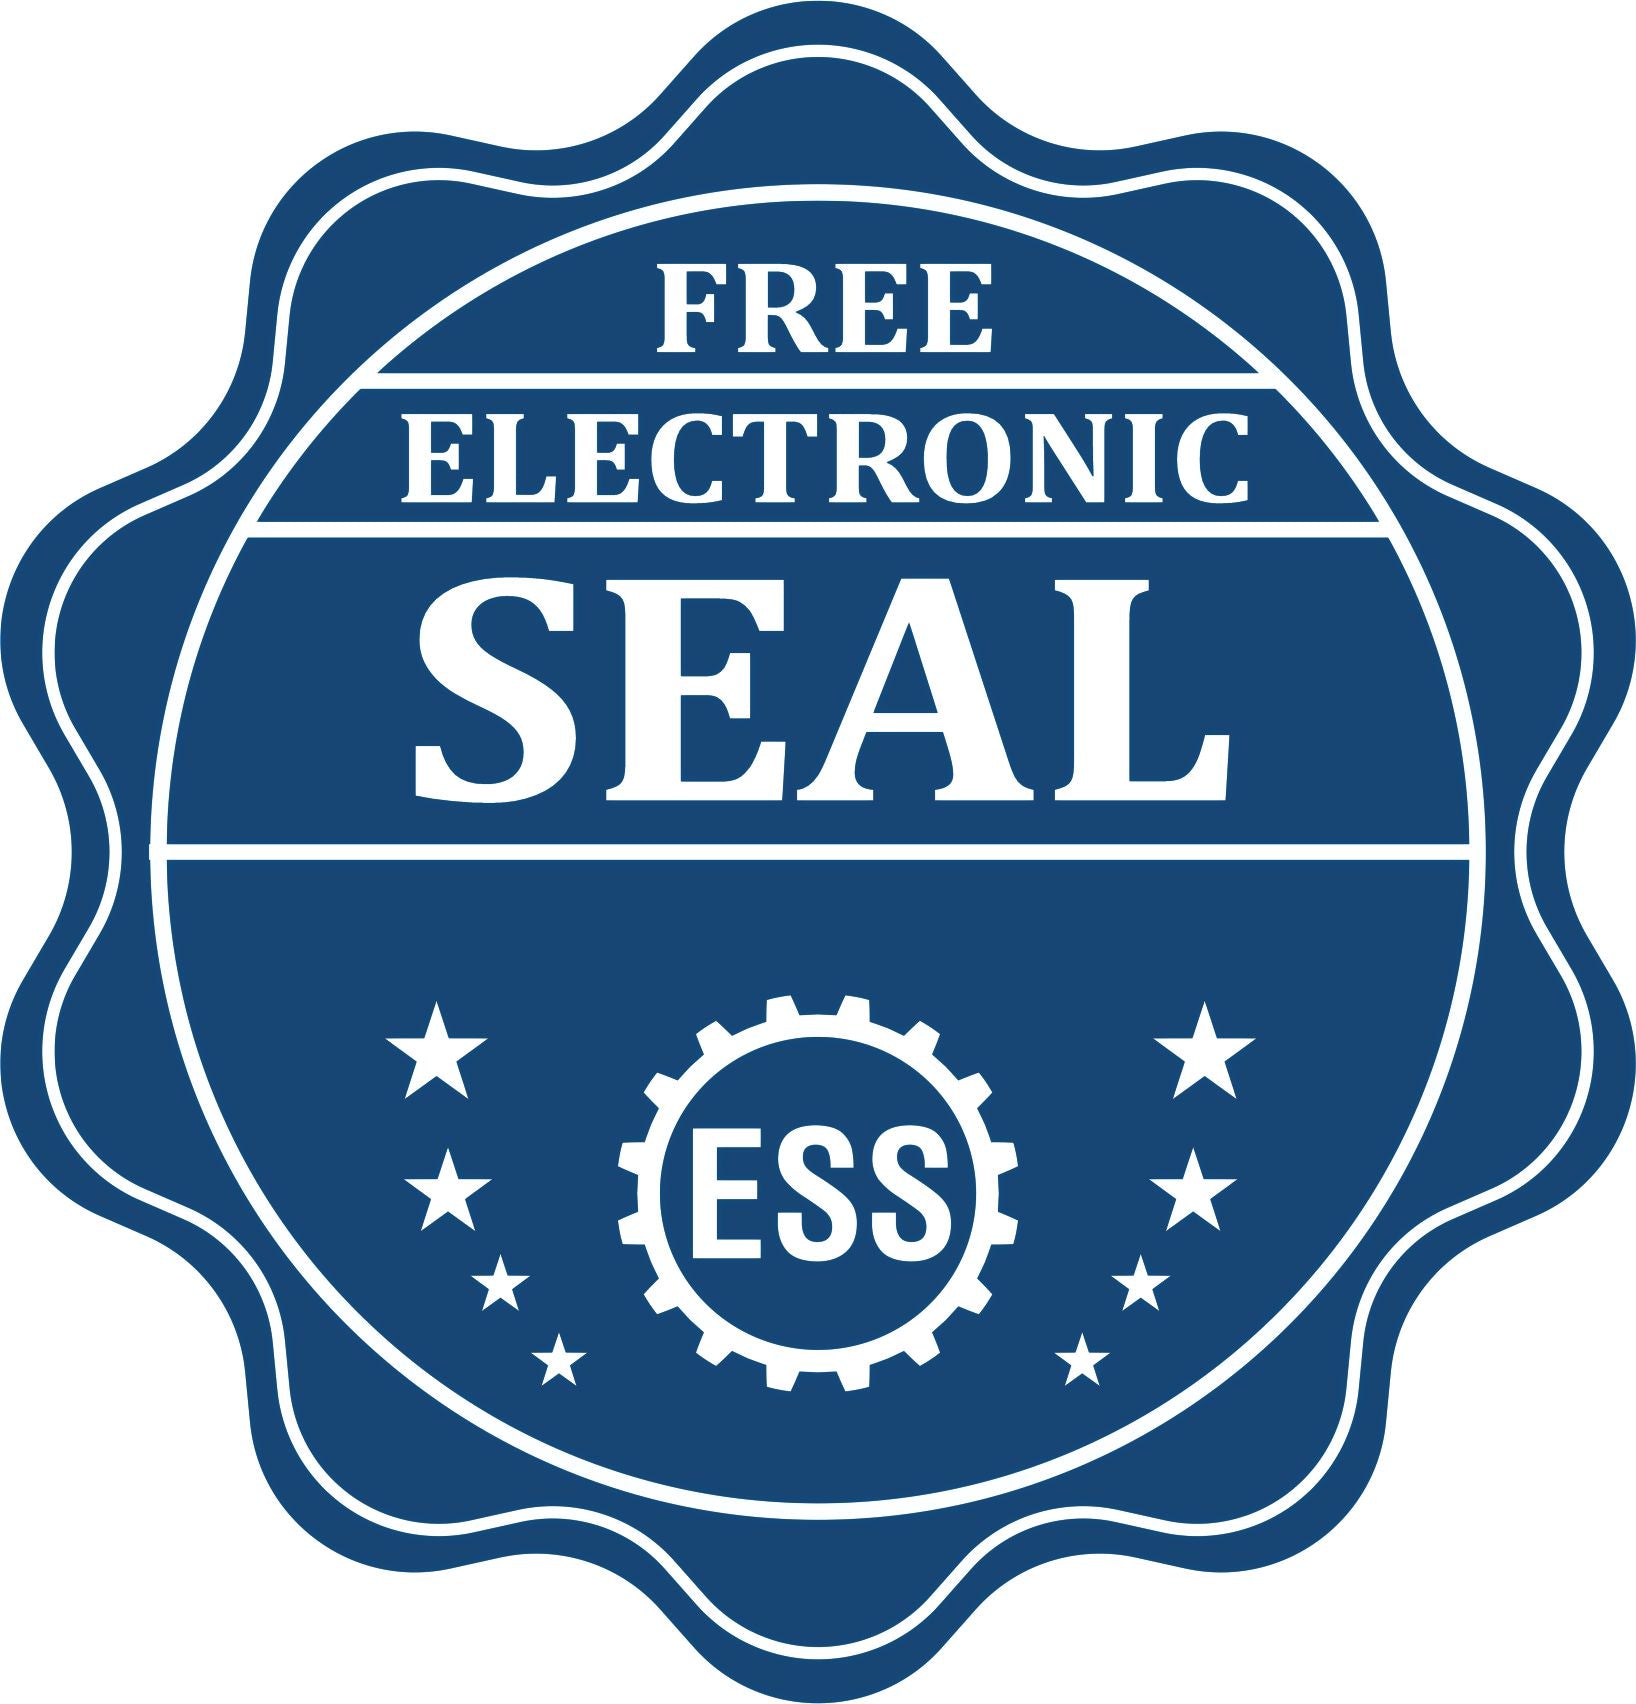 A badge showing a free electronic seal for the Hybrid Michigan Land Surveyor Seal with stars and the ESS gear on the emblem.